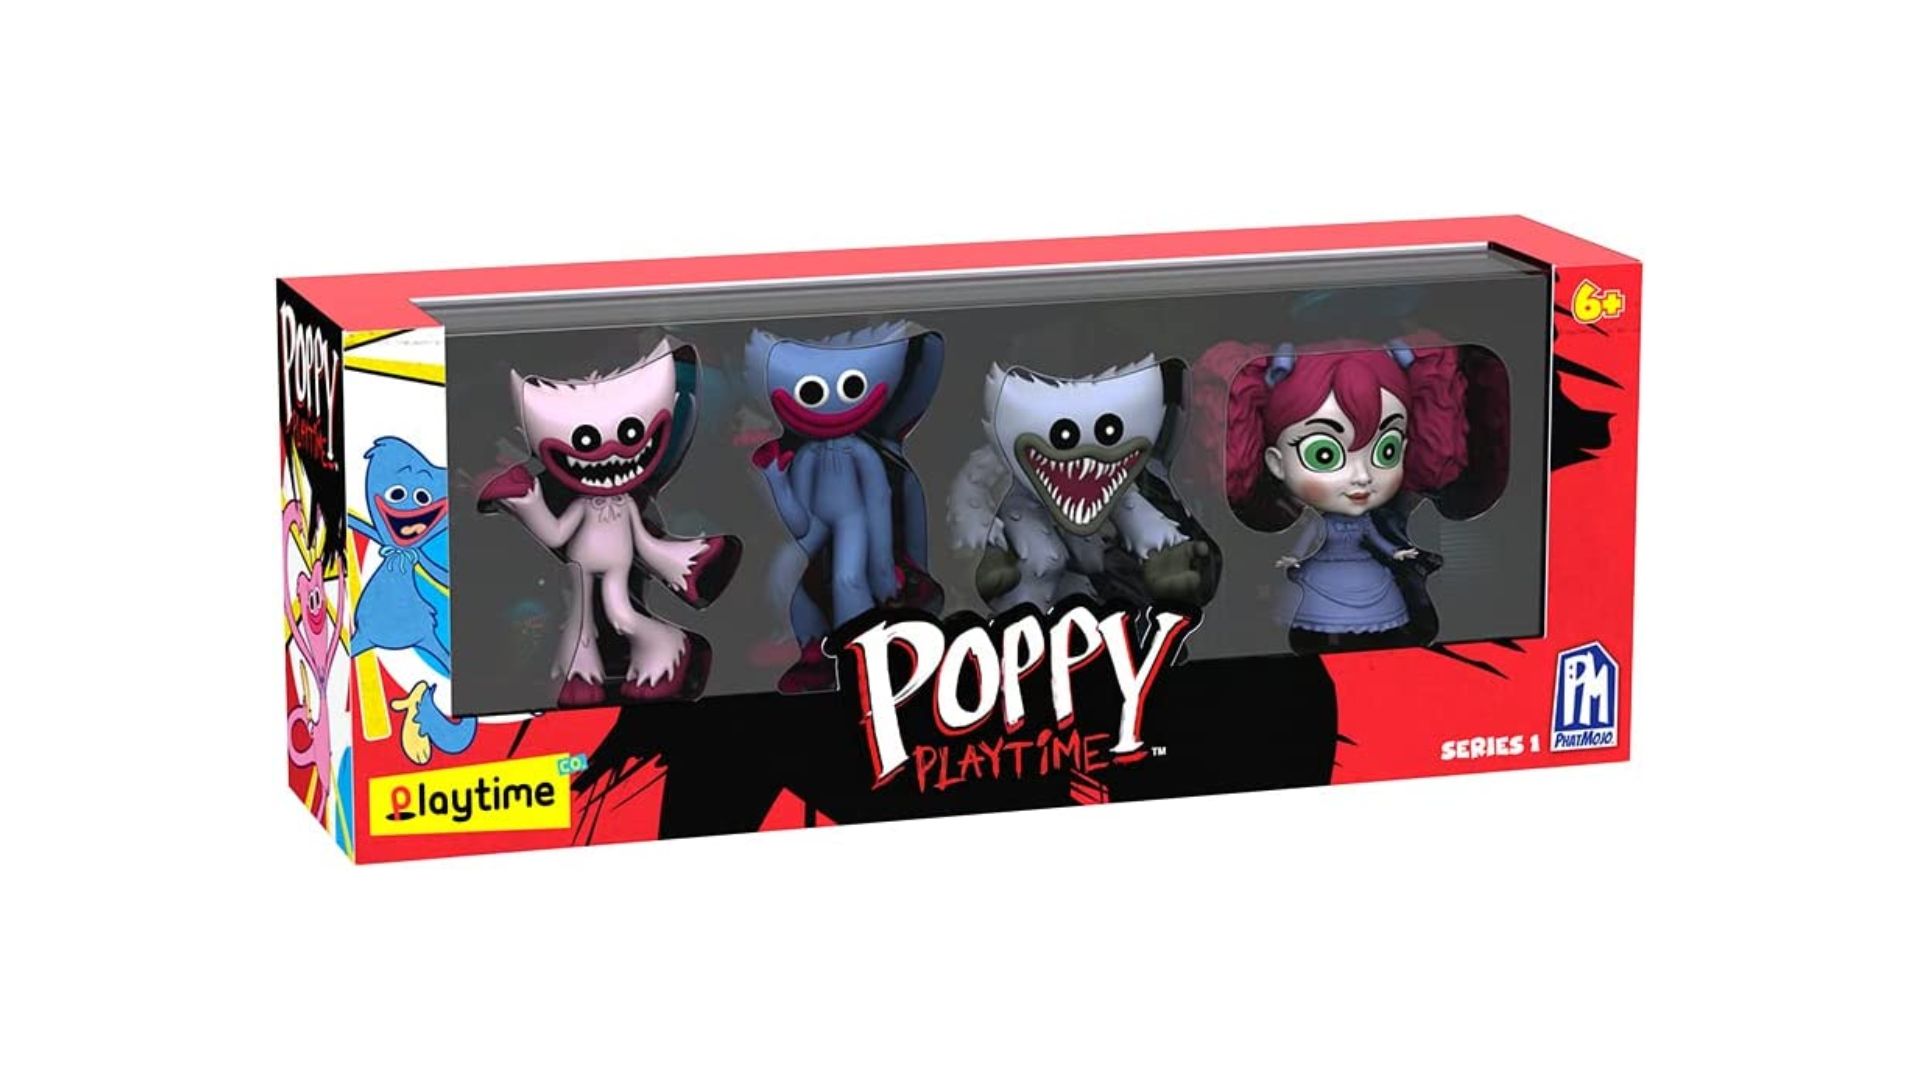 New Upcoming Official Poppy Playtime Toys!!! 